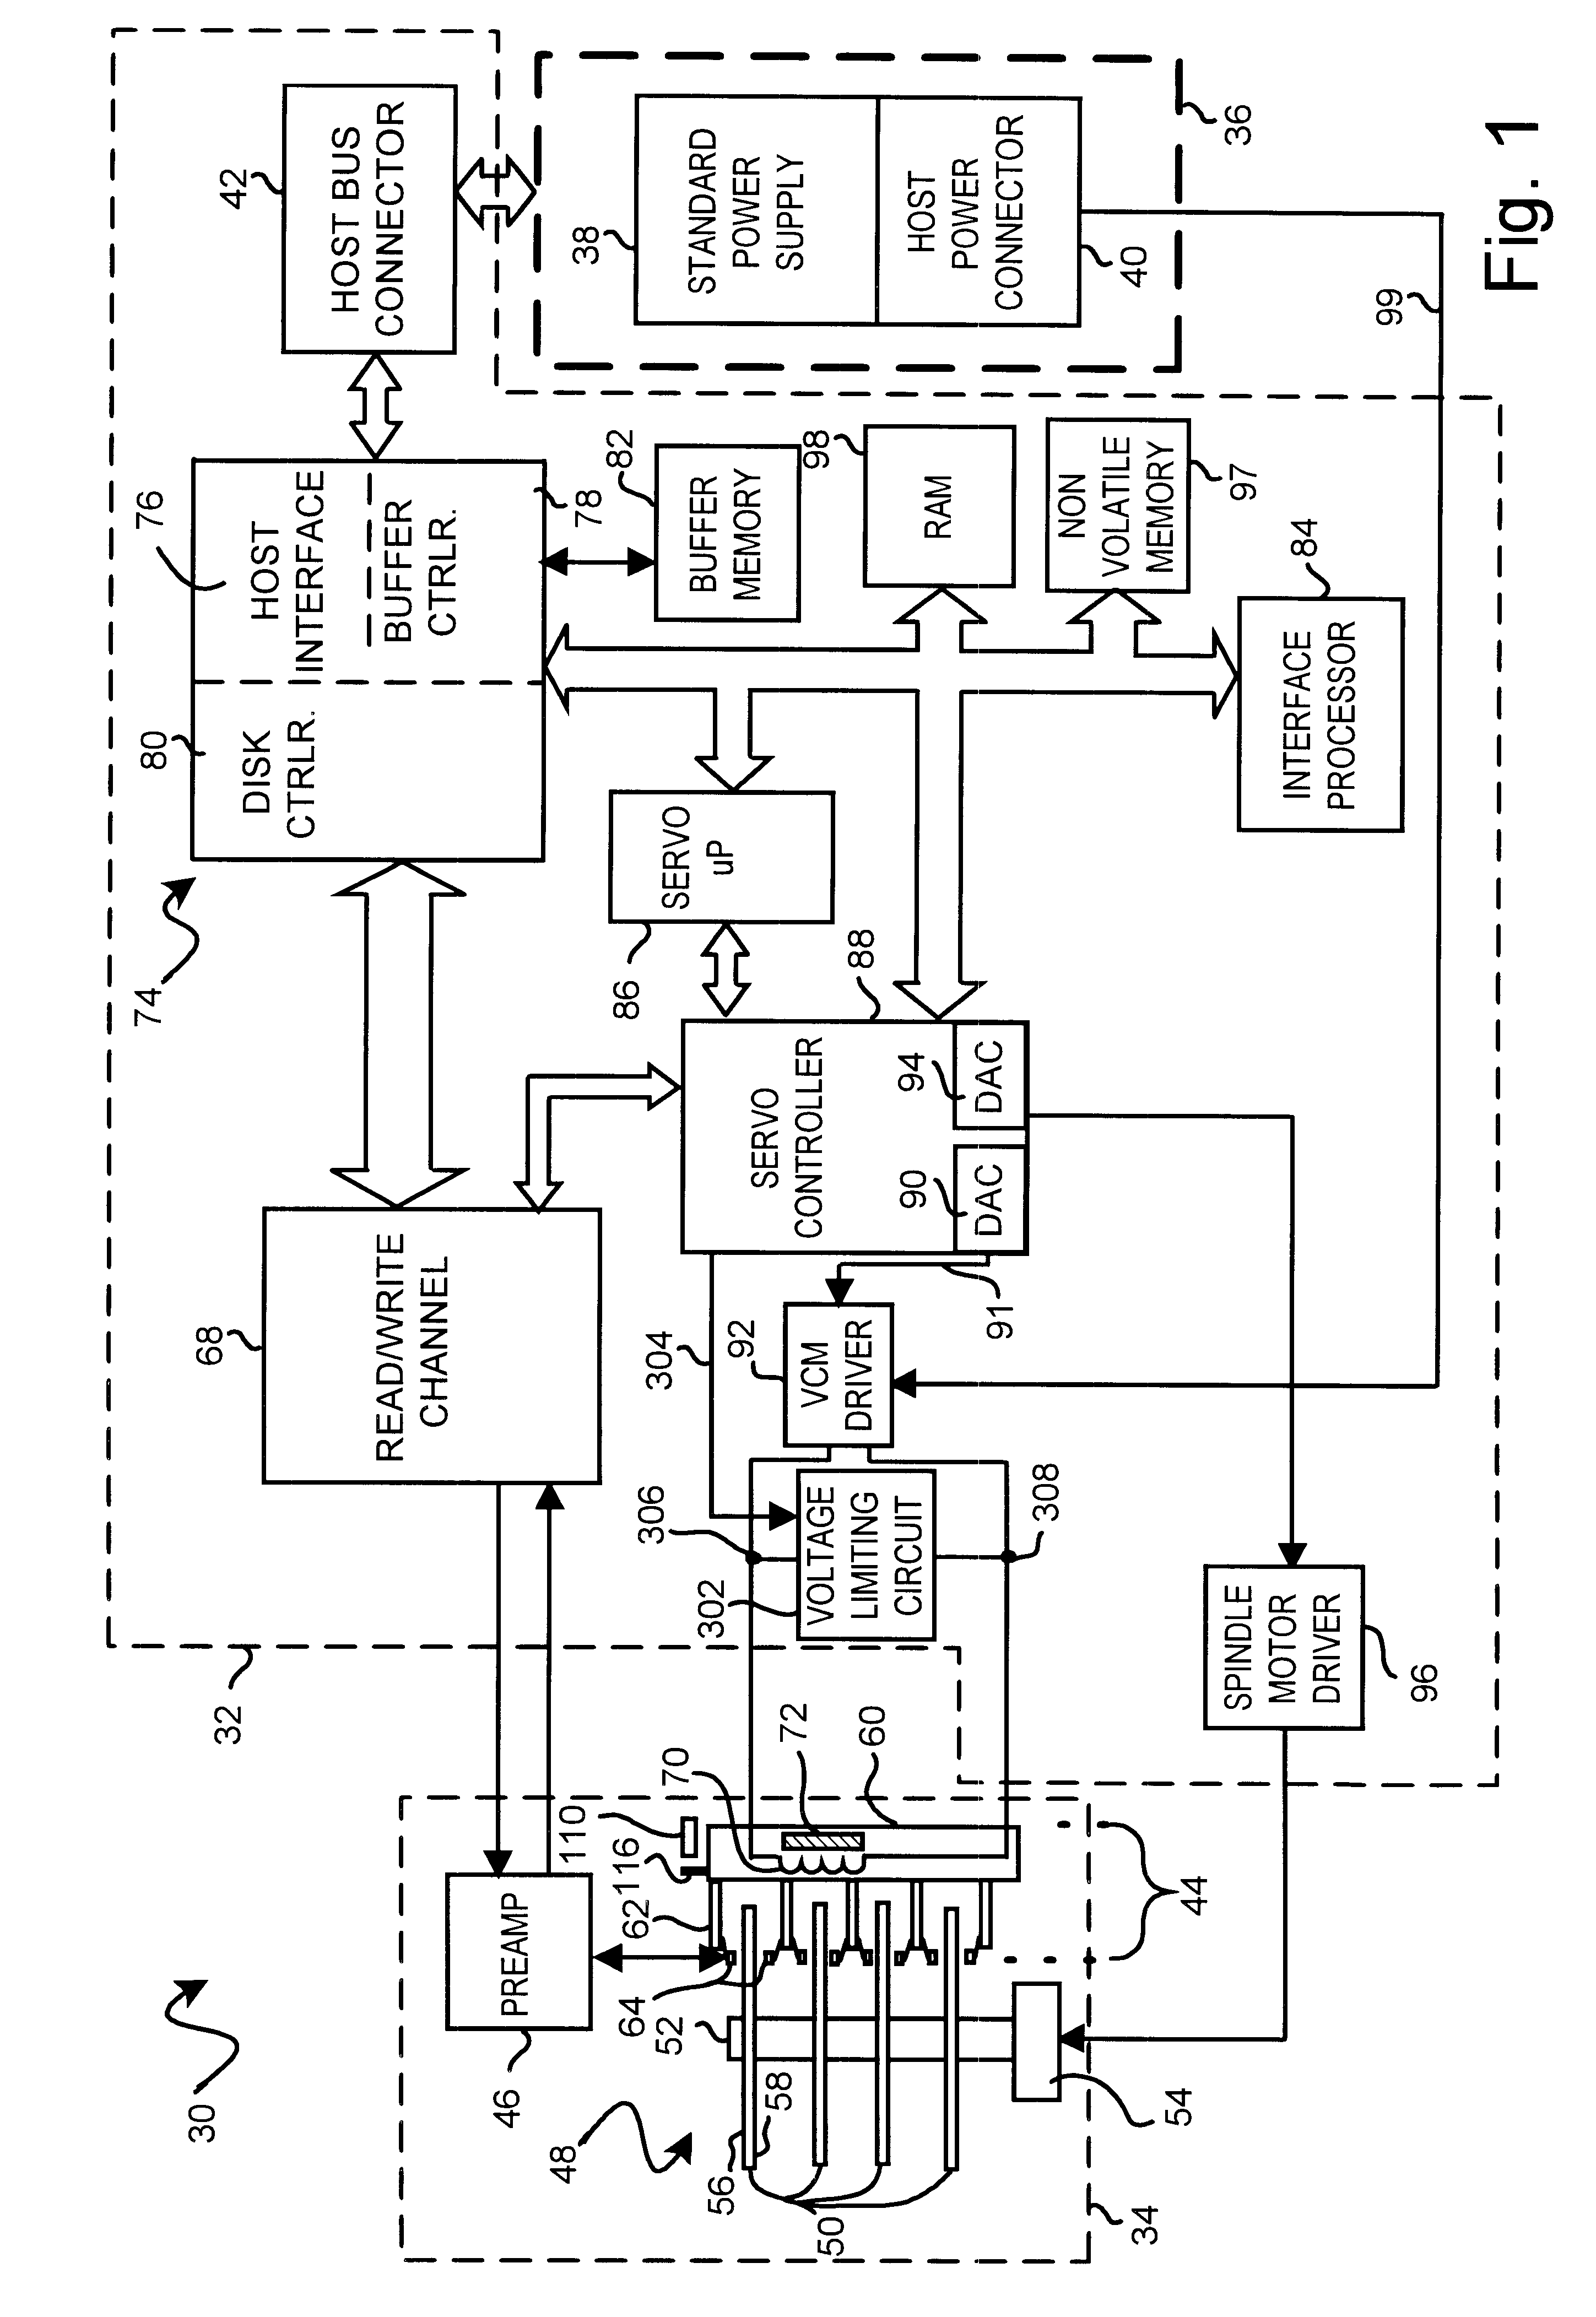 Disk drive employing method of unlatching actuator arm using VCM voltage limiting circuit to limit actuator arm velocity